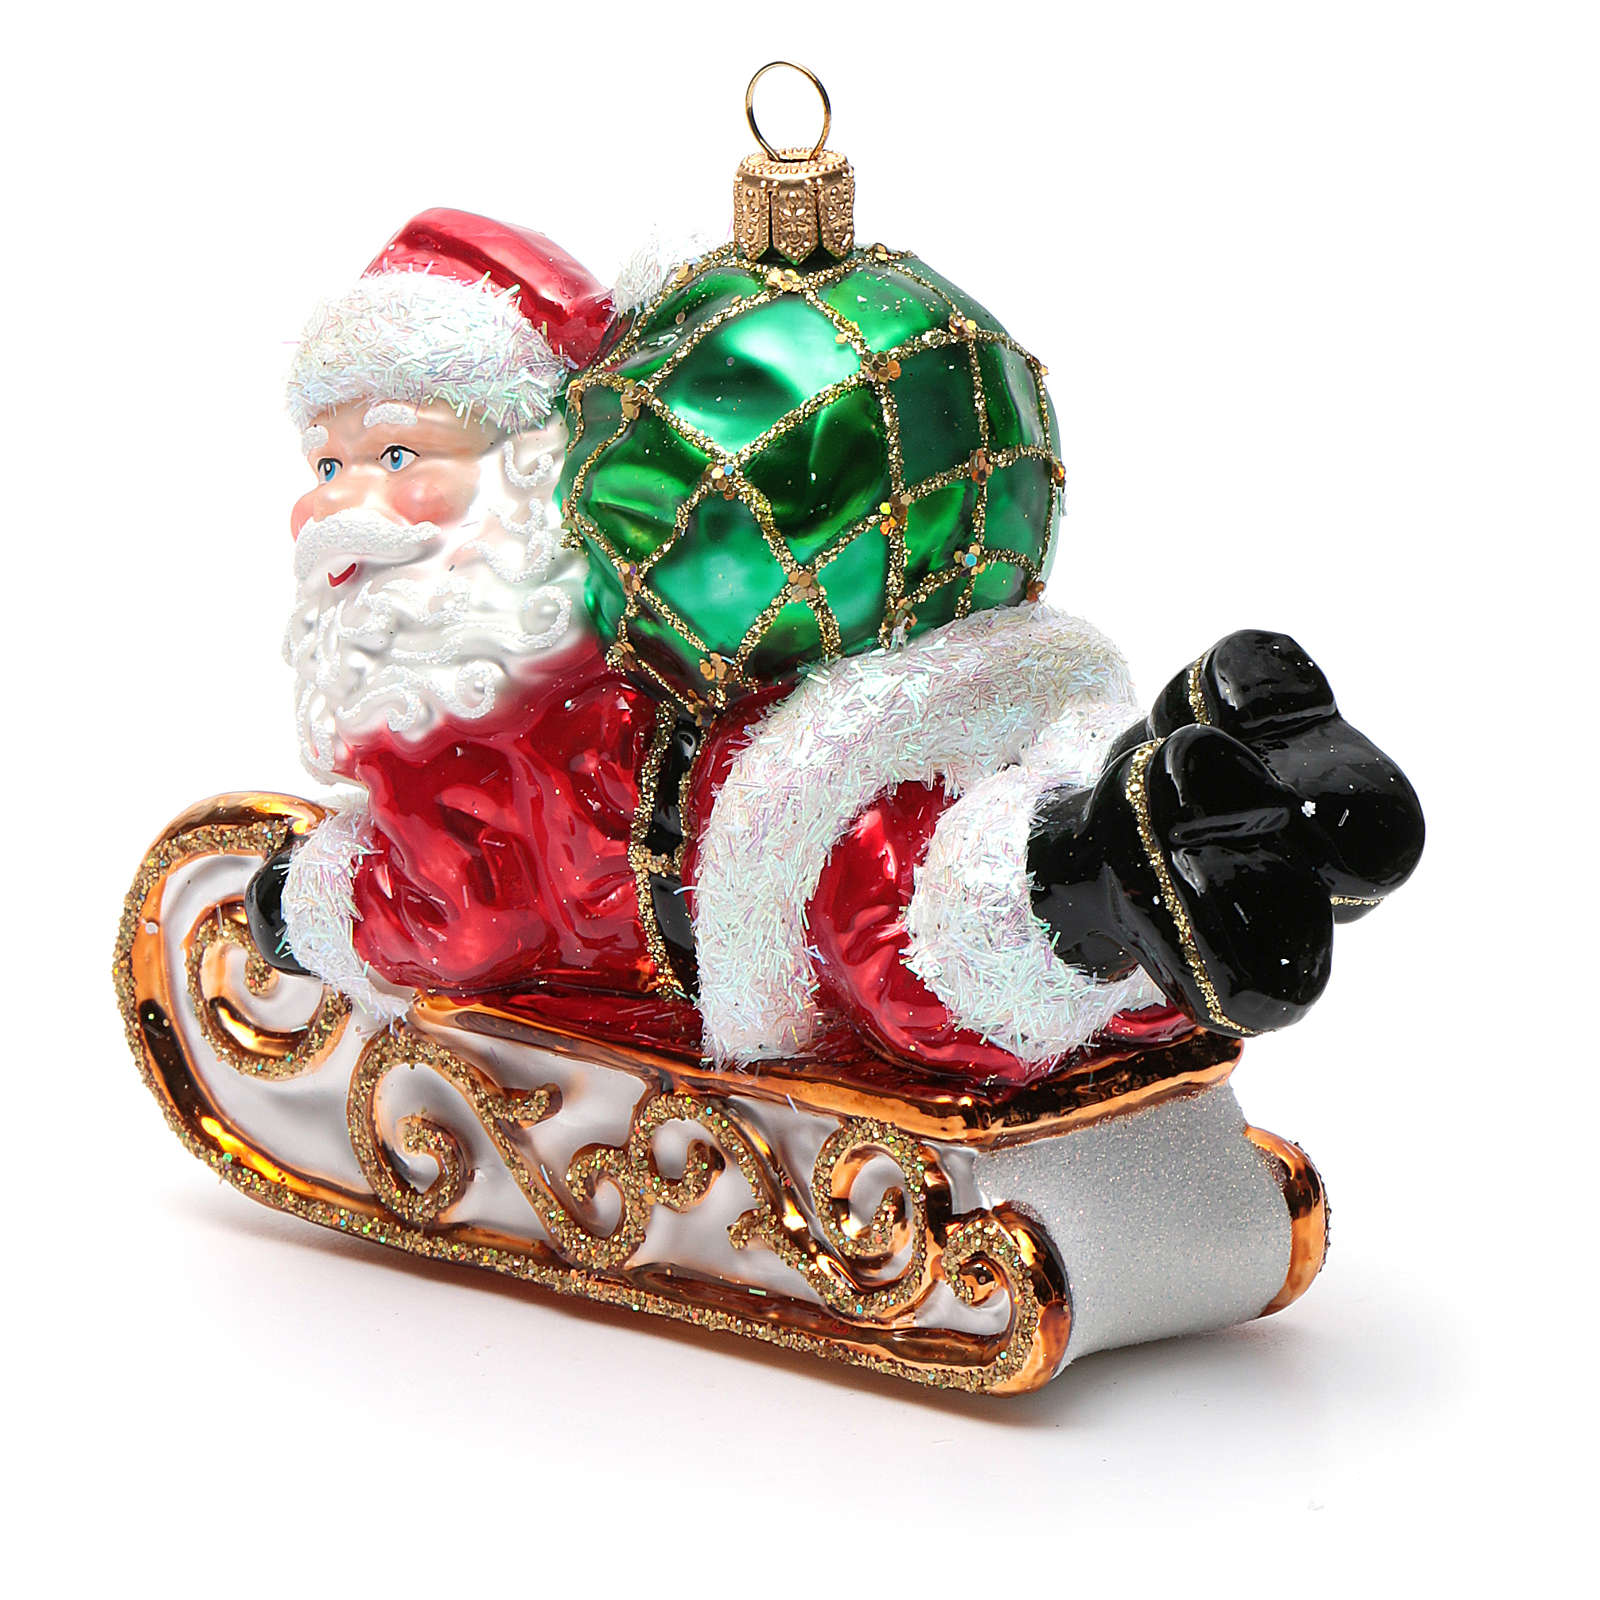 Blown glass Christmas ornament, Santa Claus with sled | online sales on